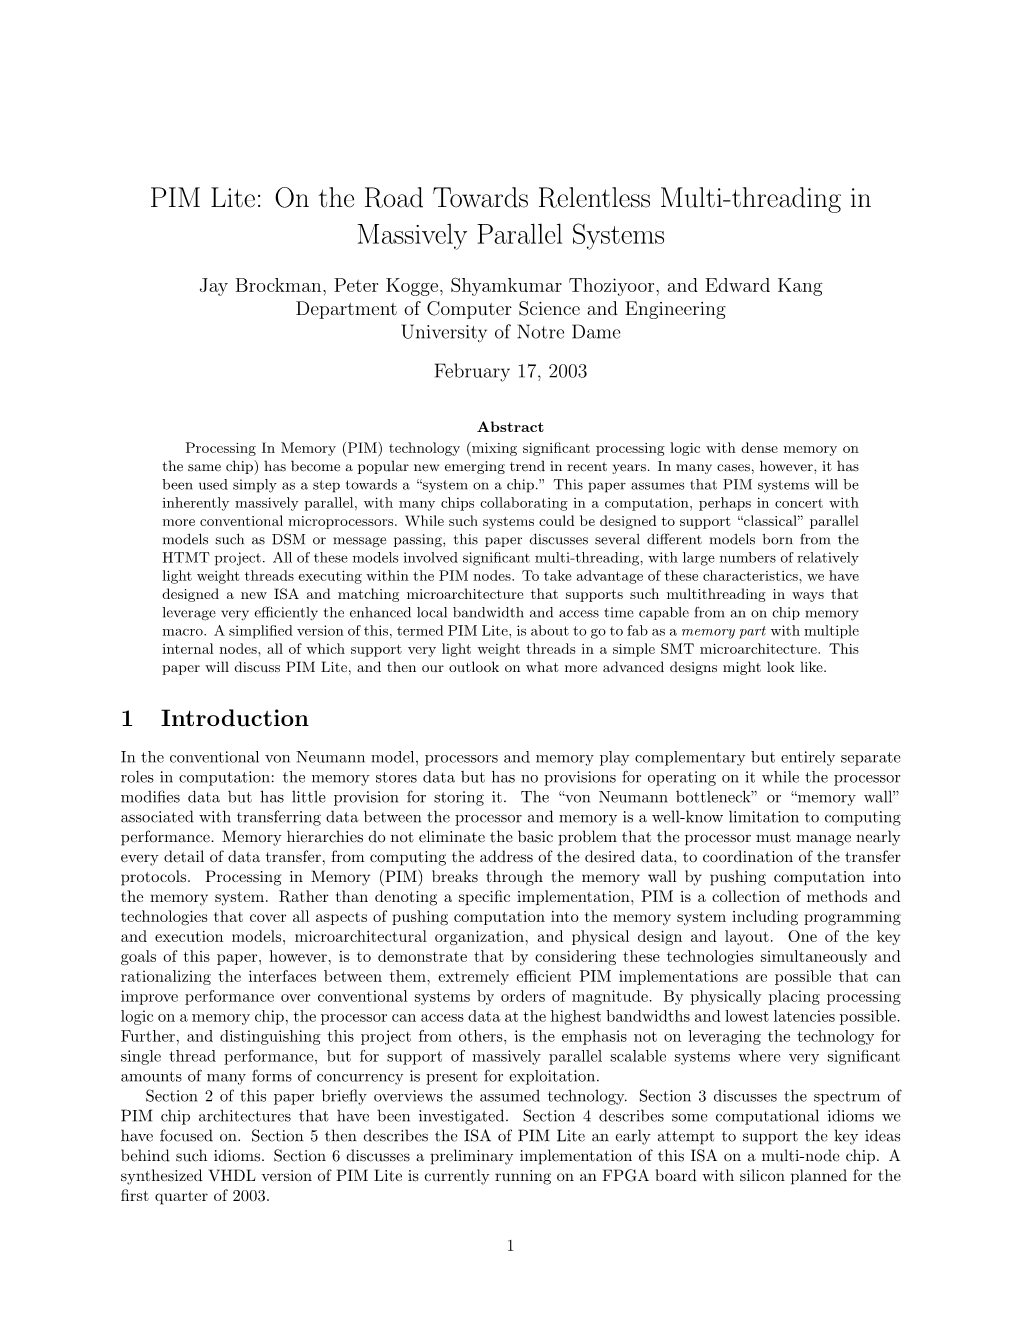 PIM Lite: on the Road Towards Relentless Multi-Threading in Massively Parallel Systems